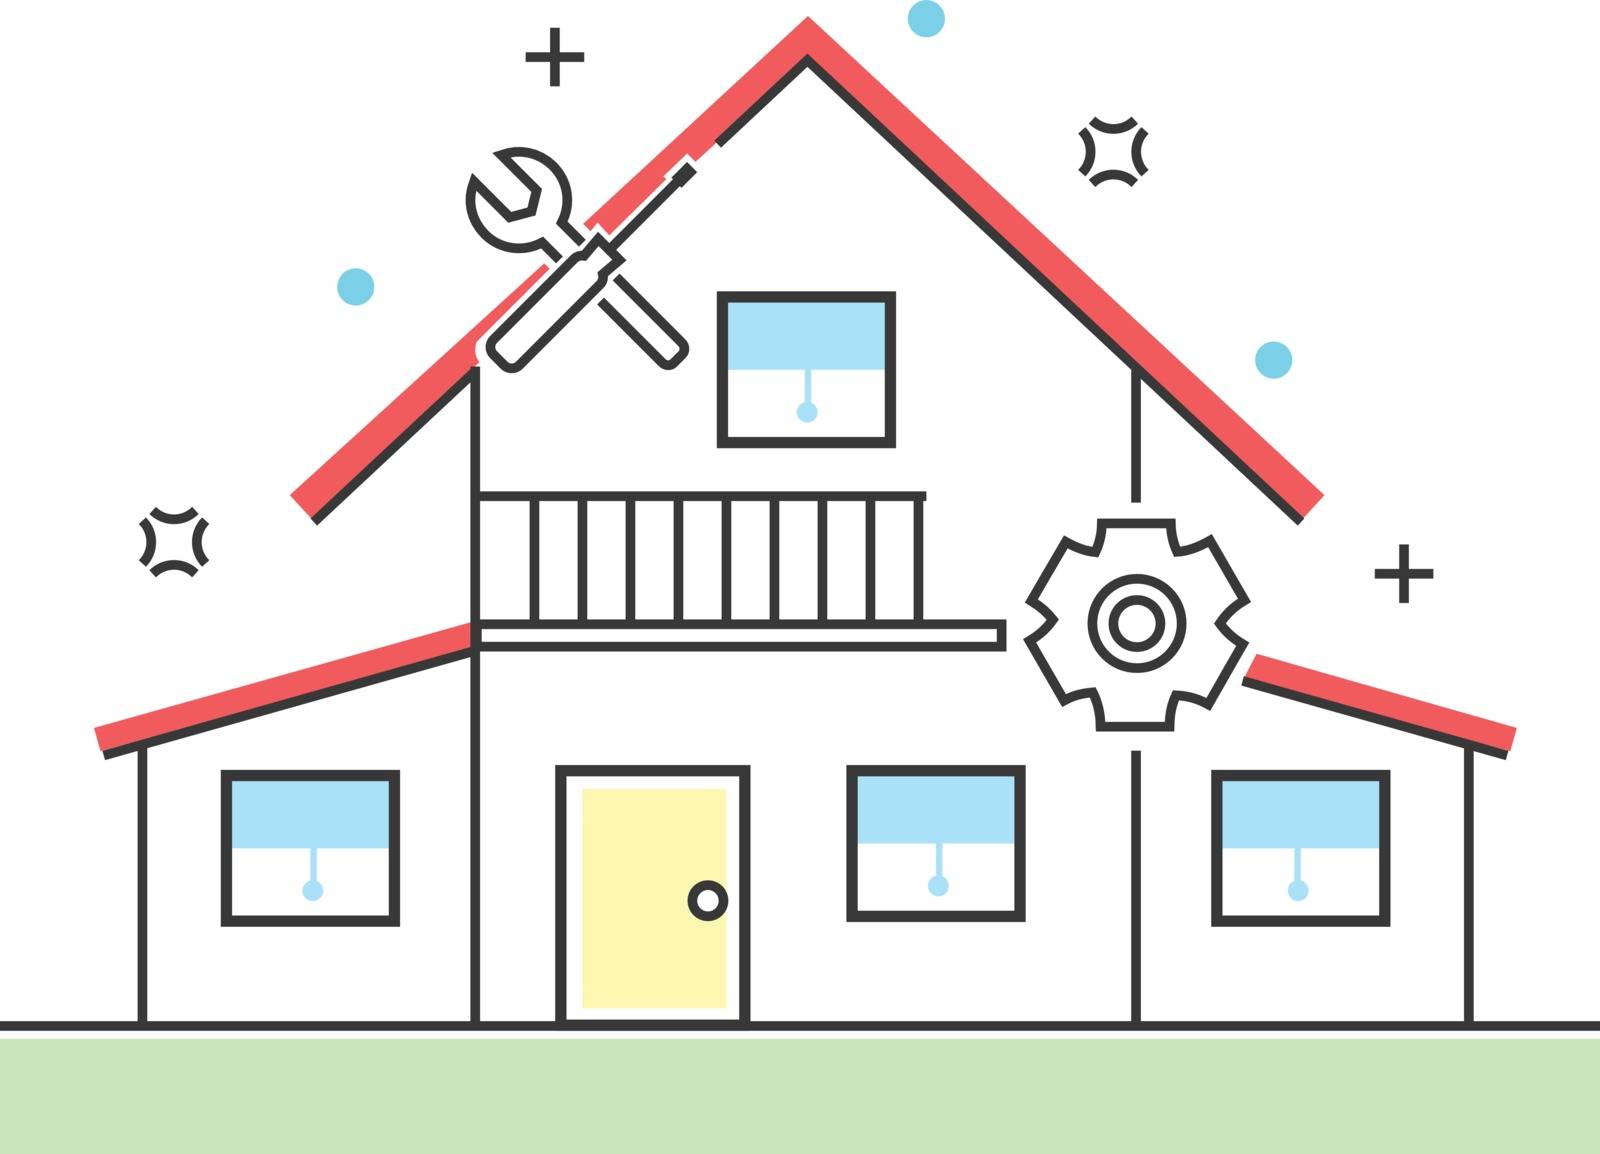 Fixing house line icons. Construction, building and architecture vector illustration by glossygirl21